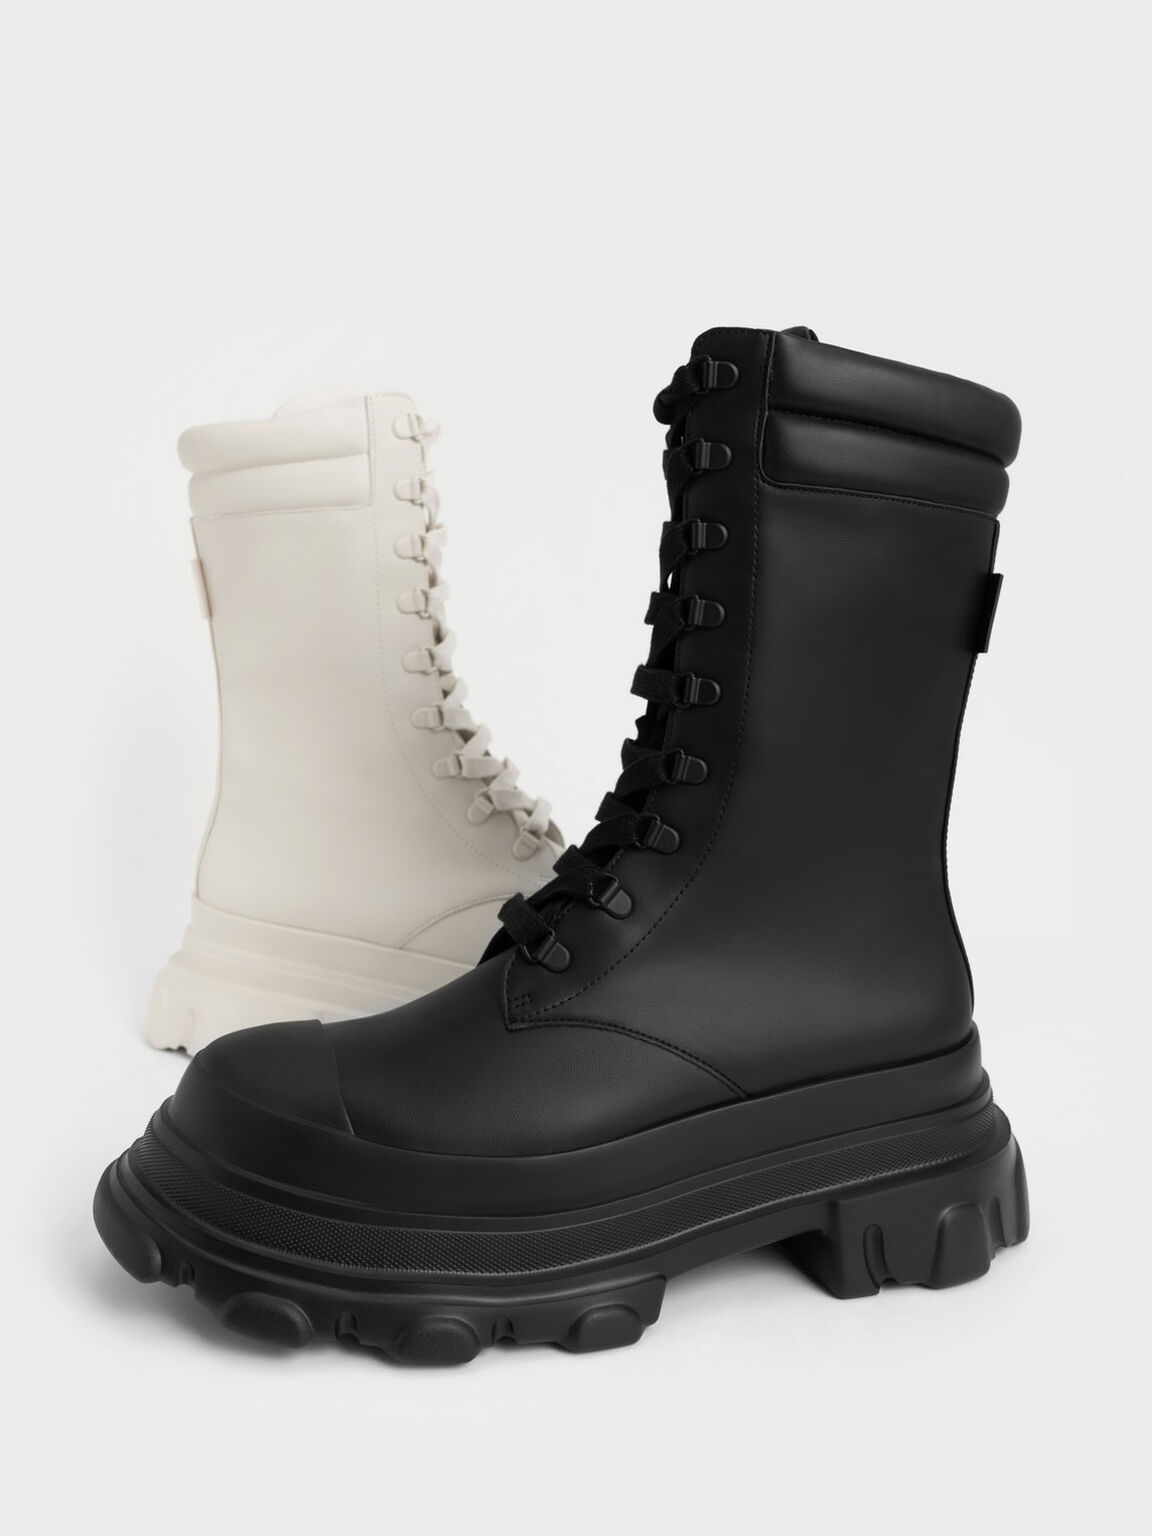 Chunky Sole Padded Combat Boots, Chalk, hi-res